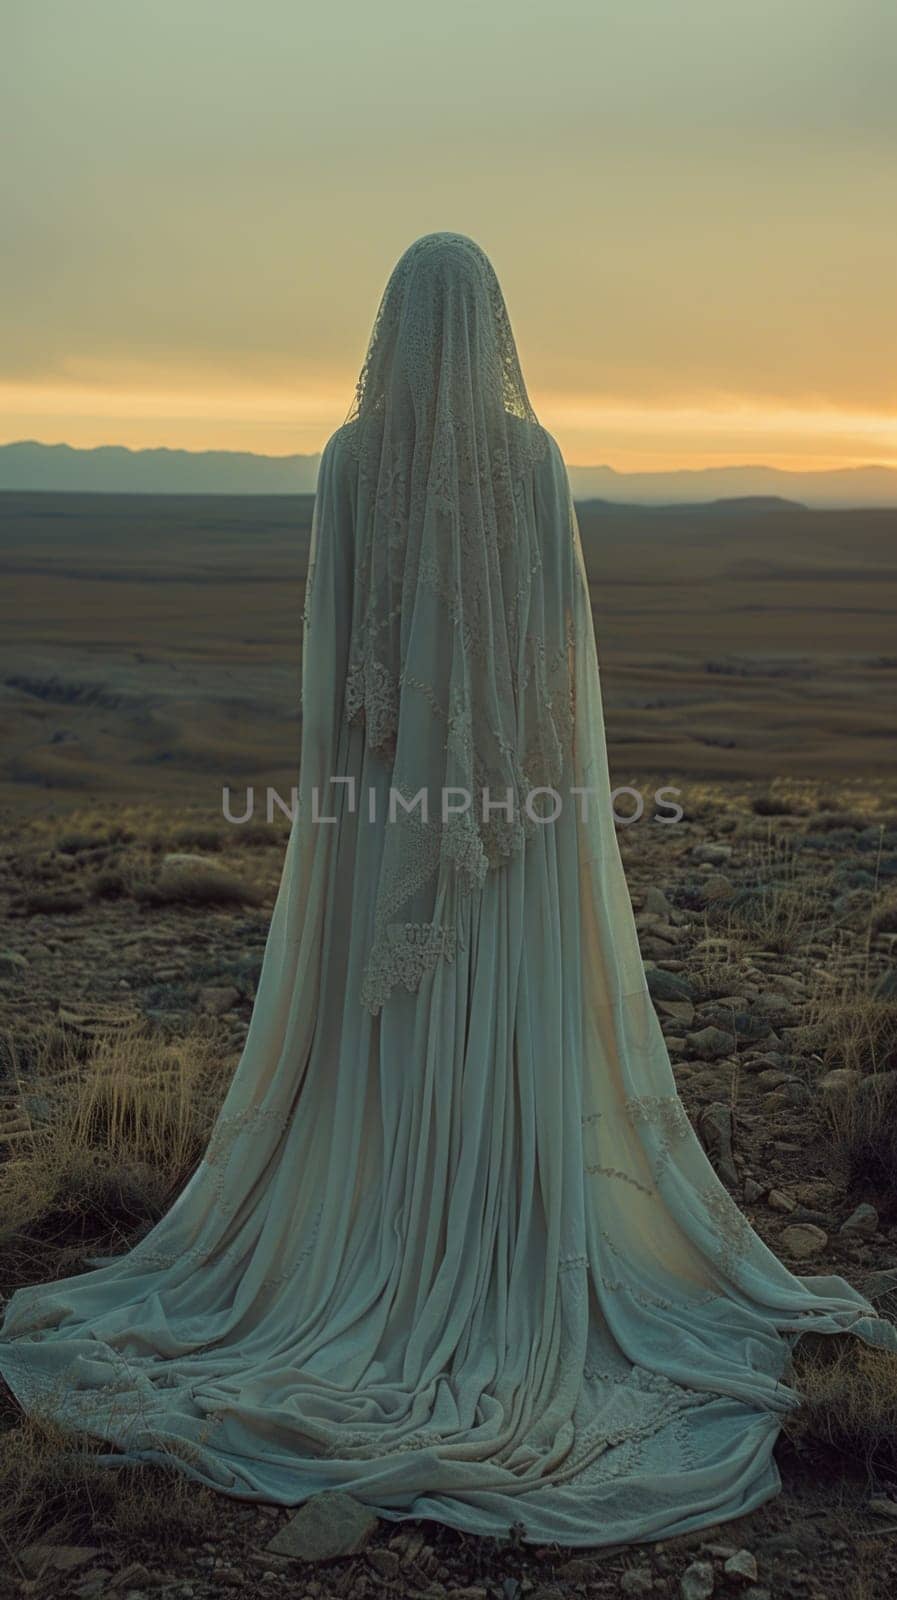 A lone woman stands in a field wearing a white dress, surrounded by nature.